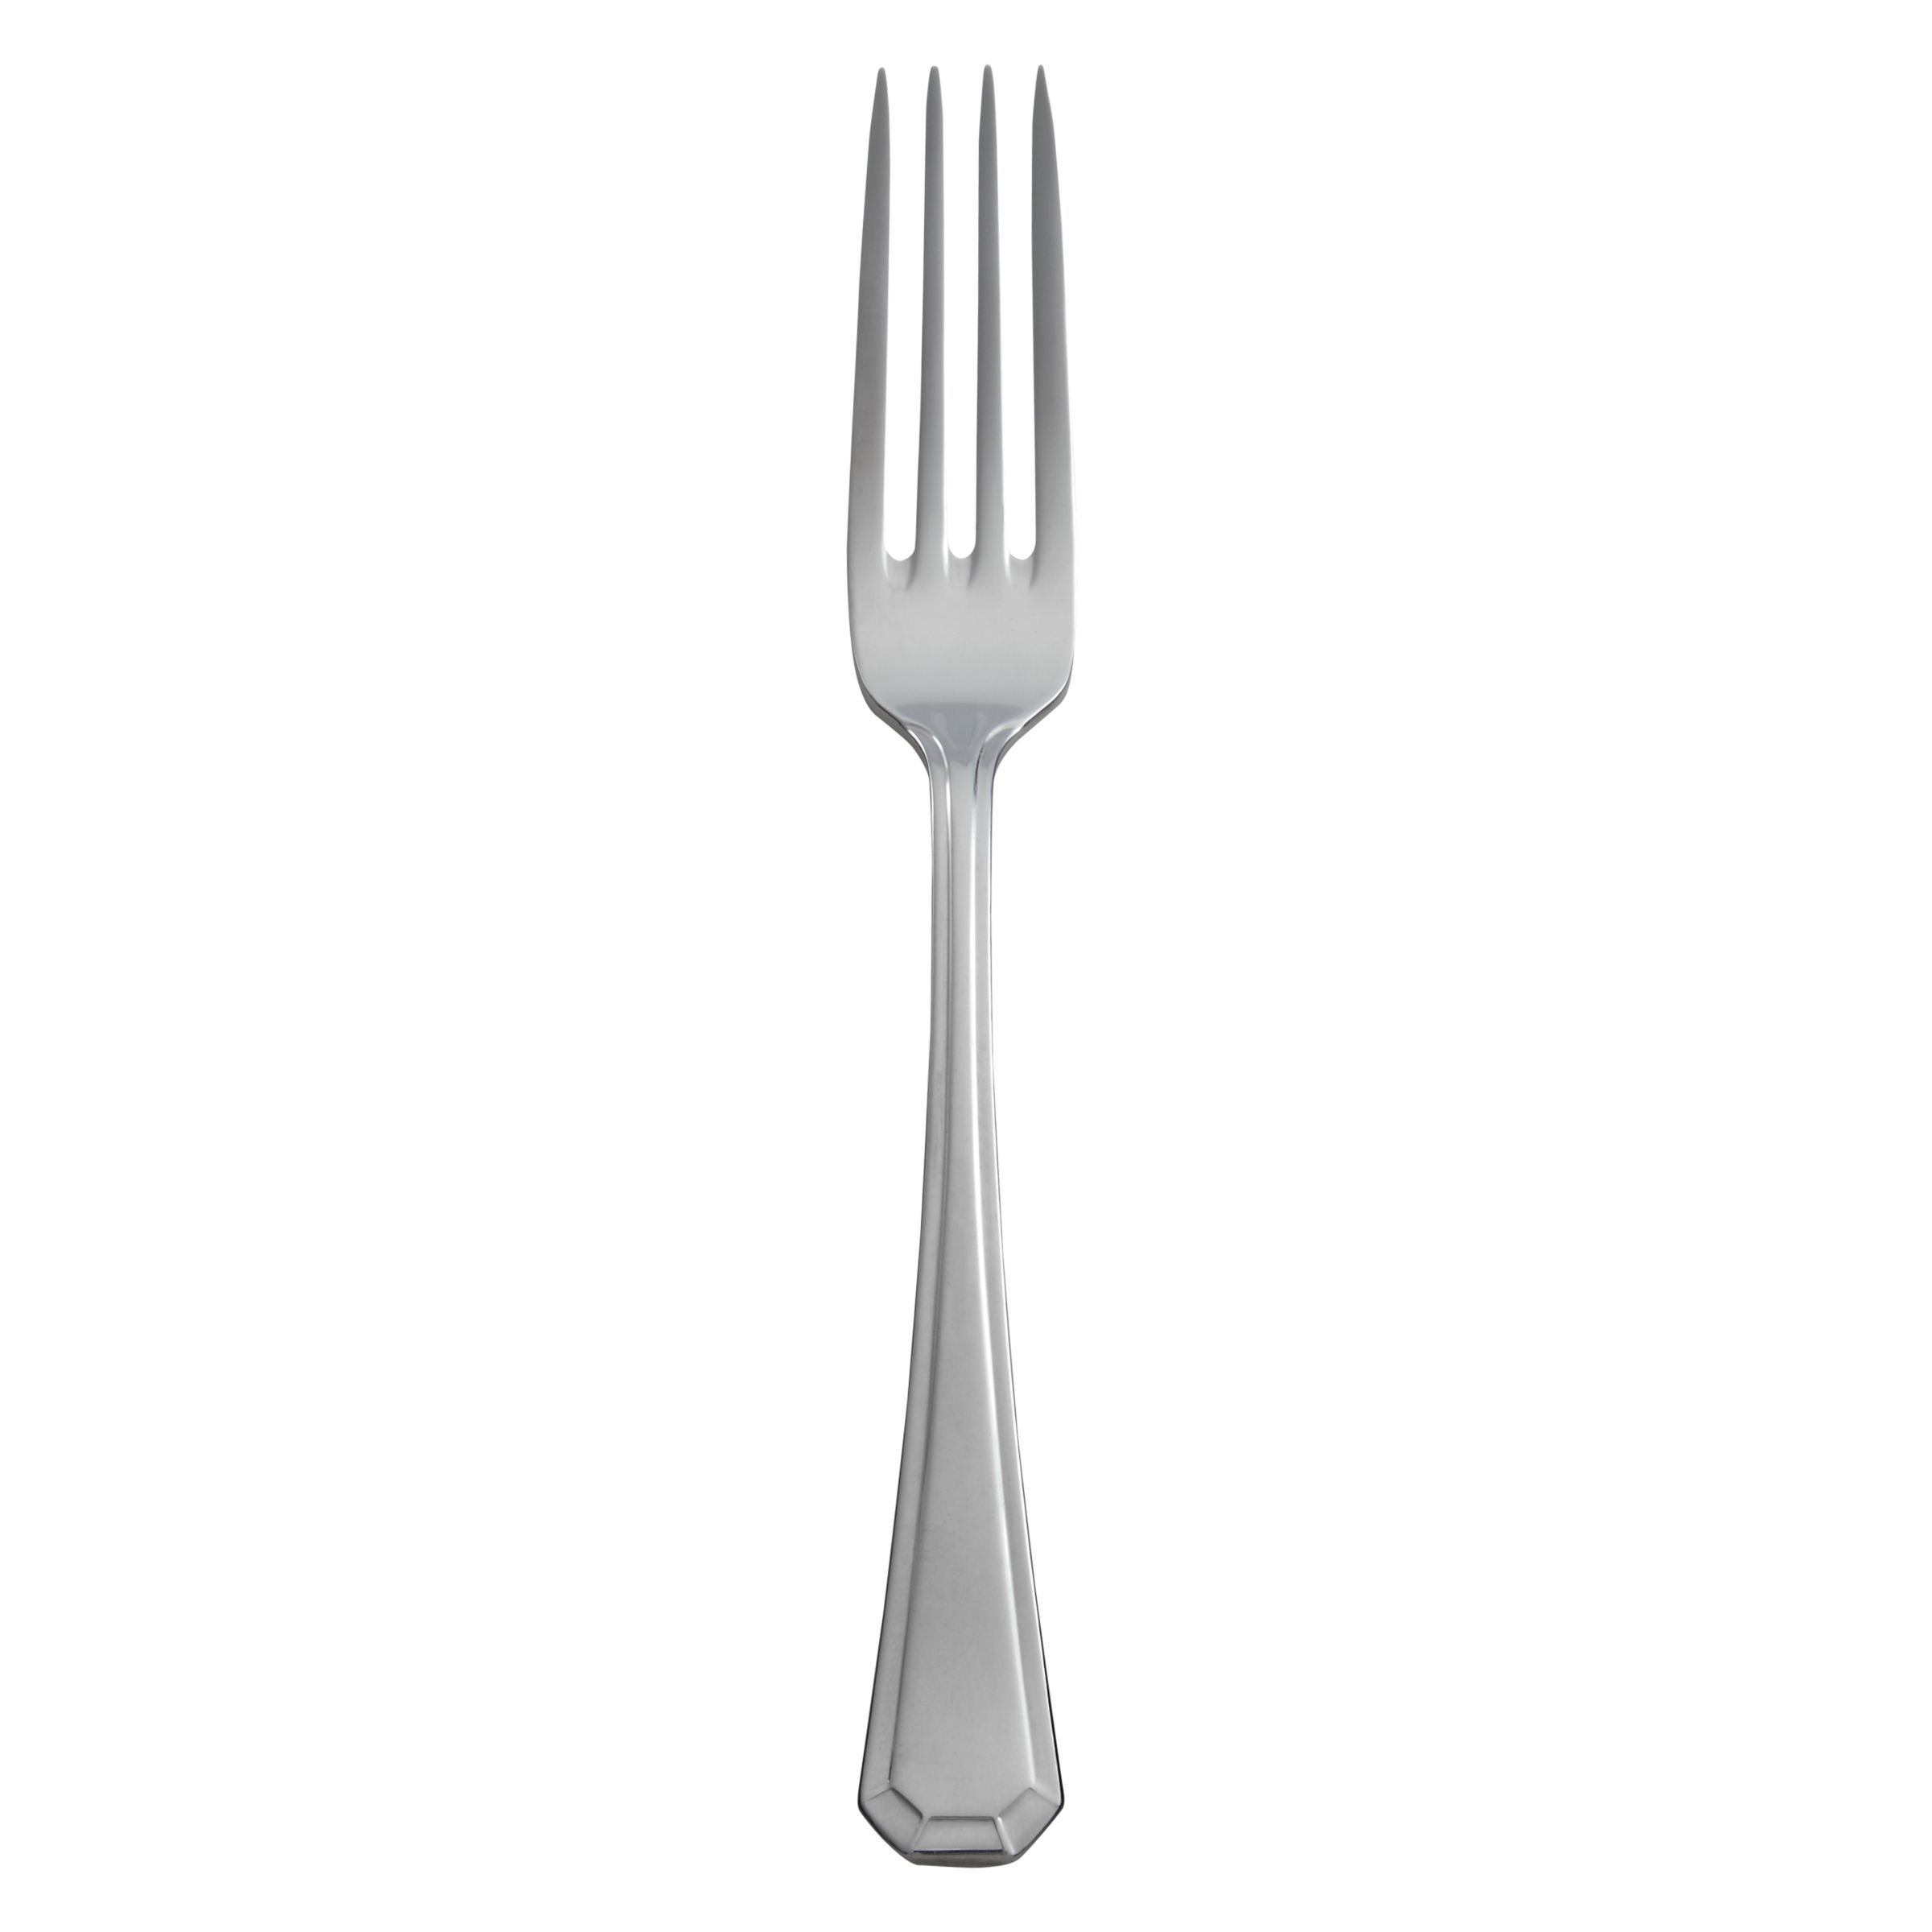 Arthur Price Grecian Table Fork, Stainless Steel